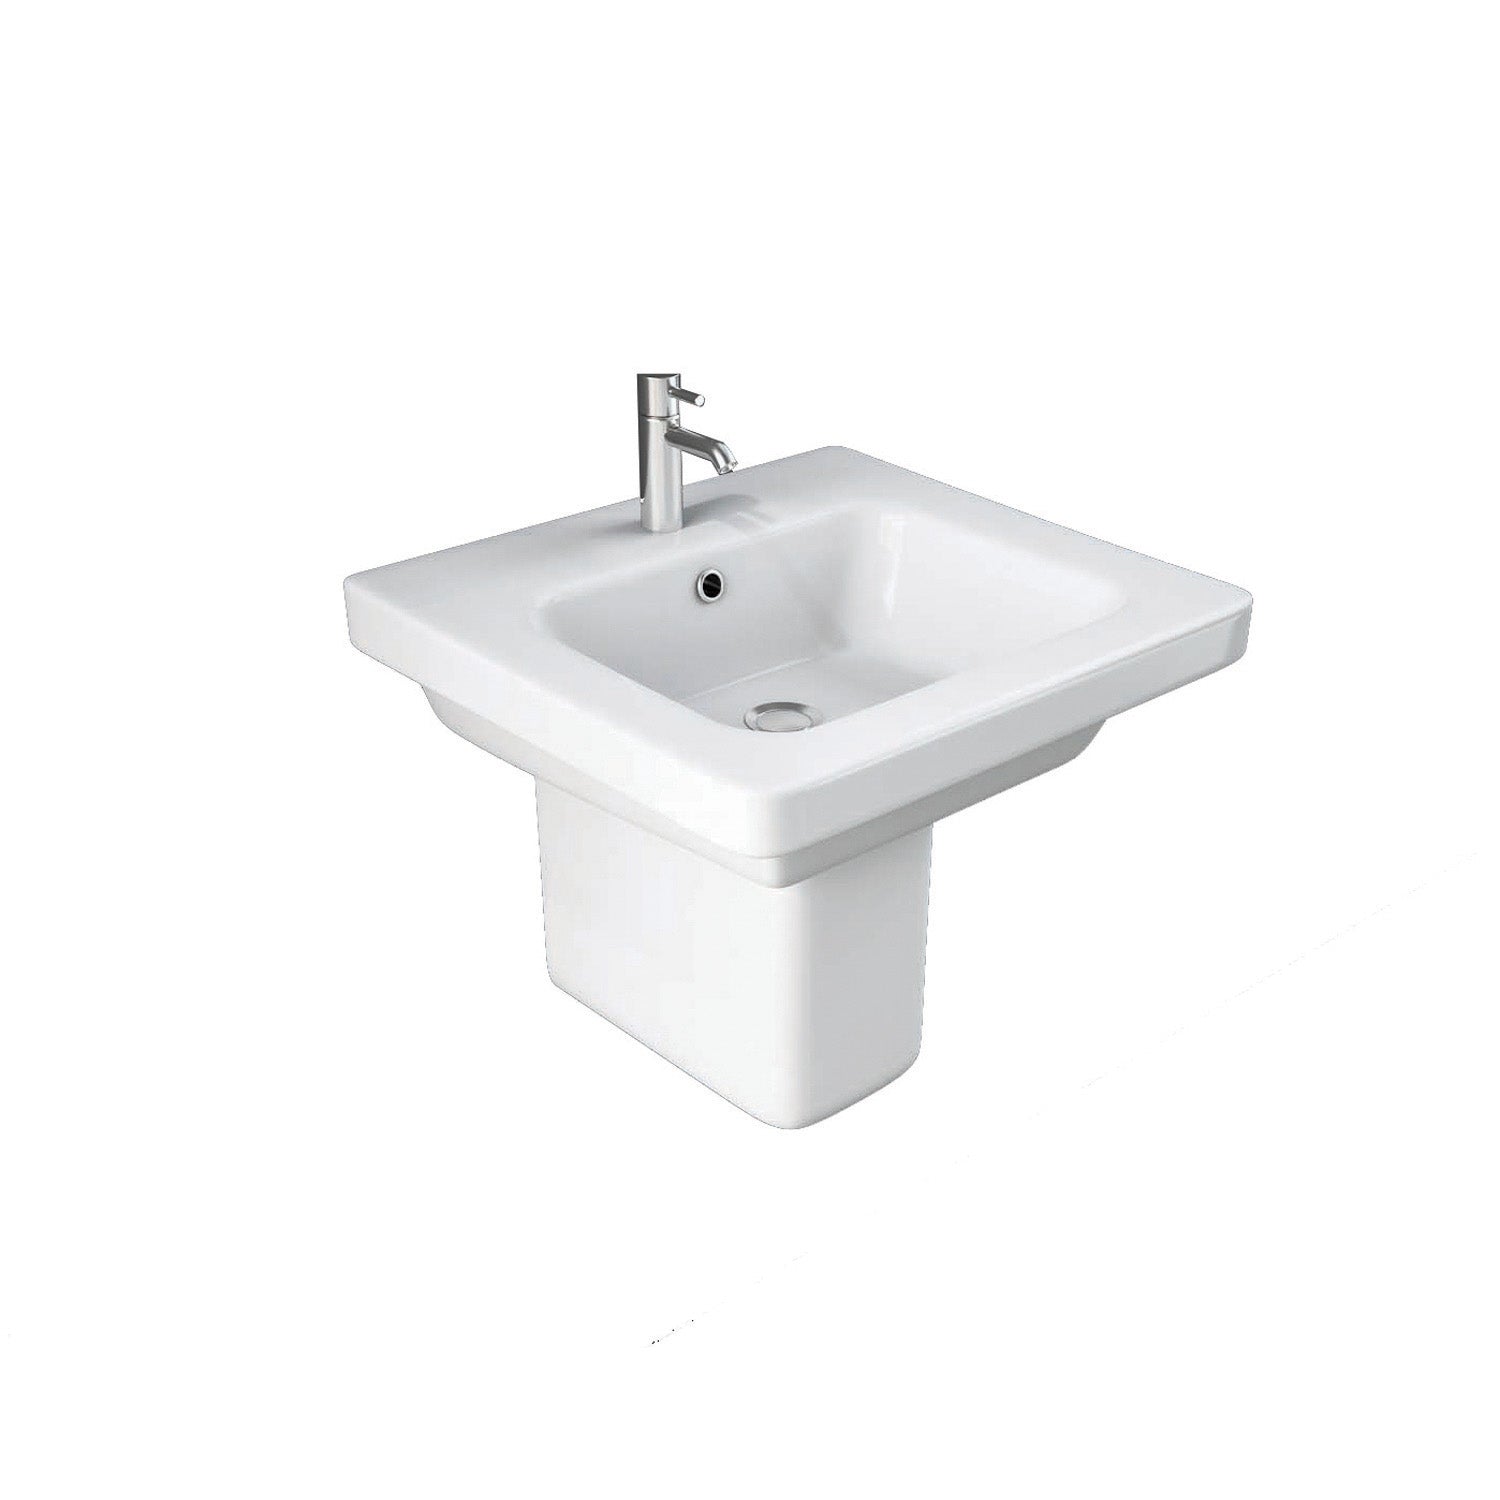 550mm Vesta Wall Hung Basin on a white background